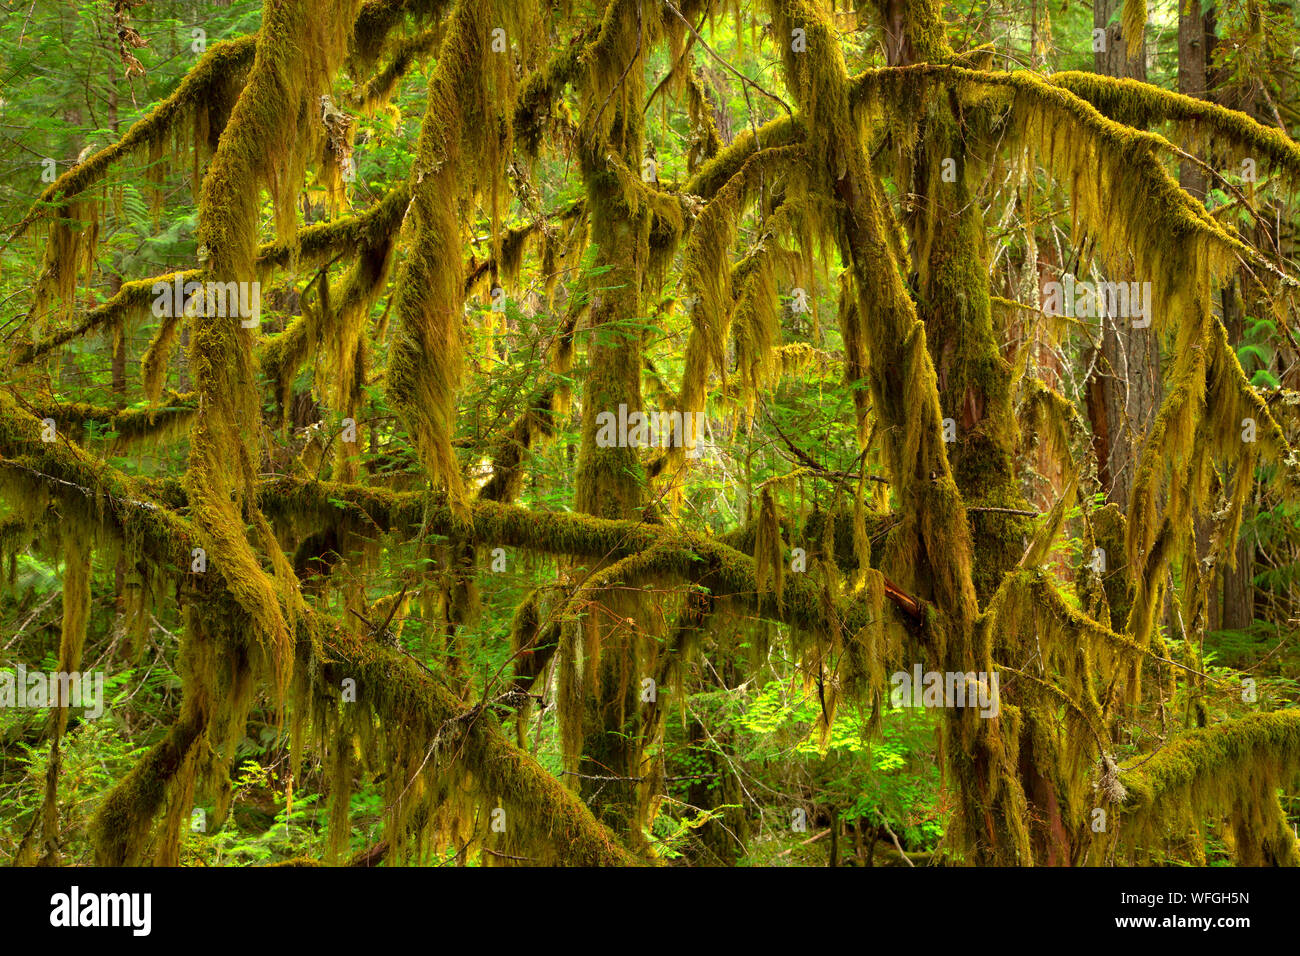 Pacific yew by Oak Fork Clackamas River, Mt Hood National Forest, Oregon Stock Photo